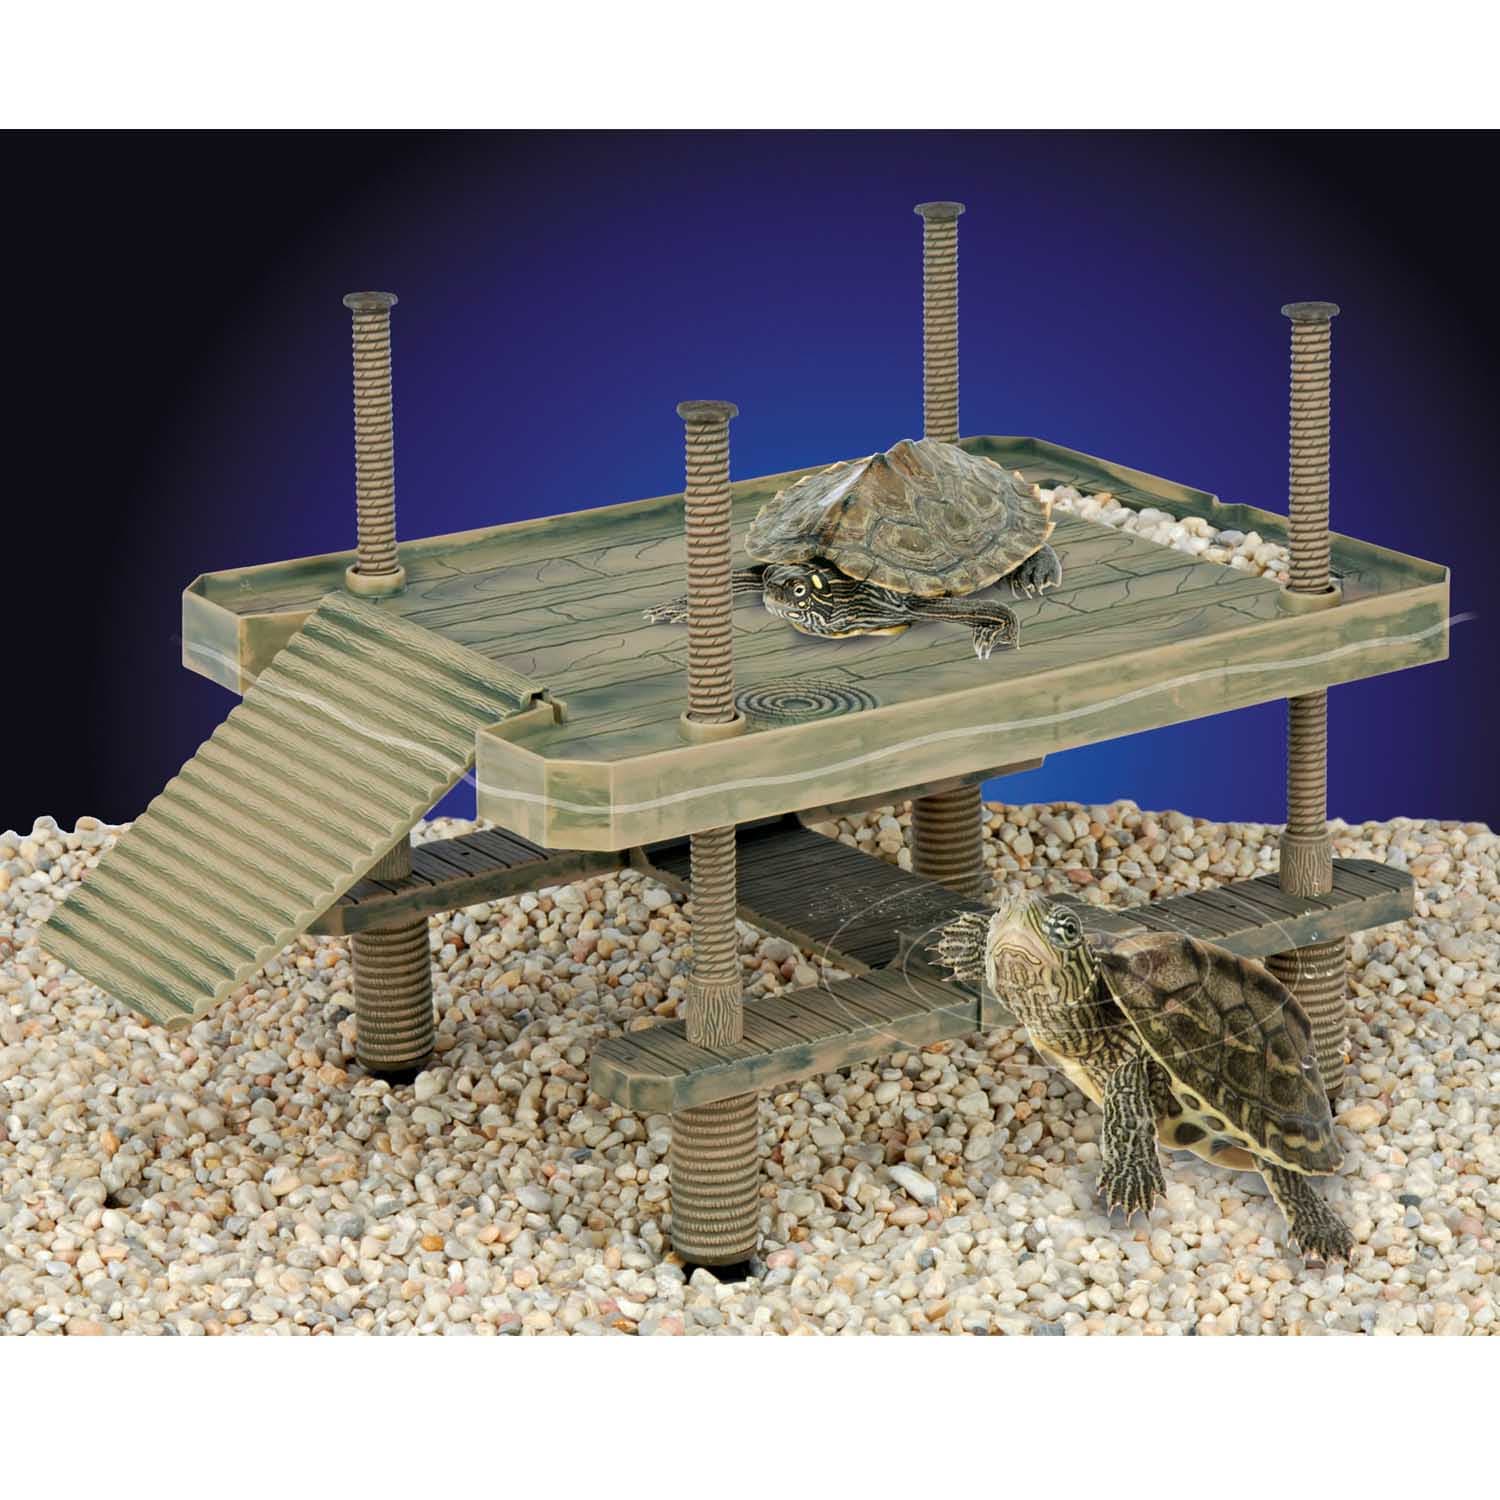 Floating Basking Dock Turtle Reptile 2-Story Wharf Pier for Large Aquariums 